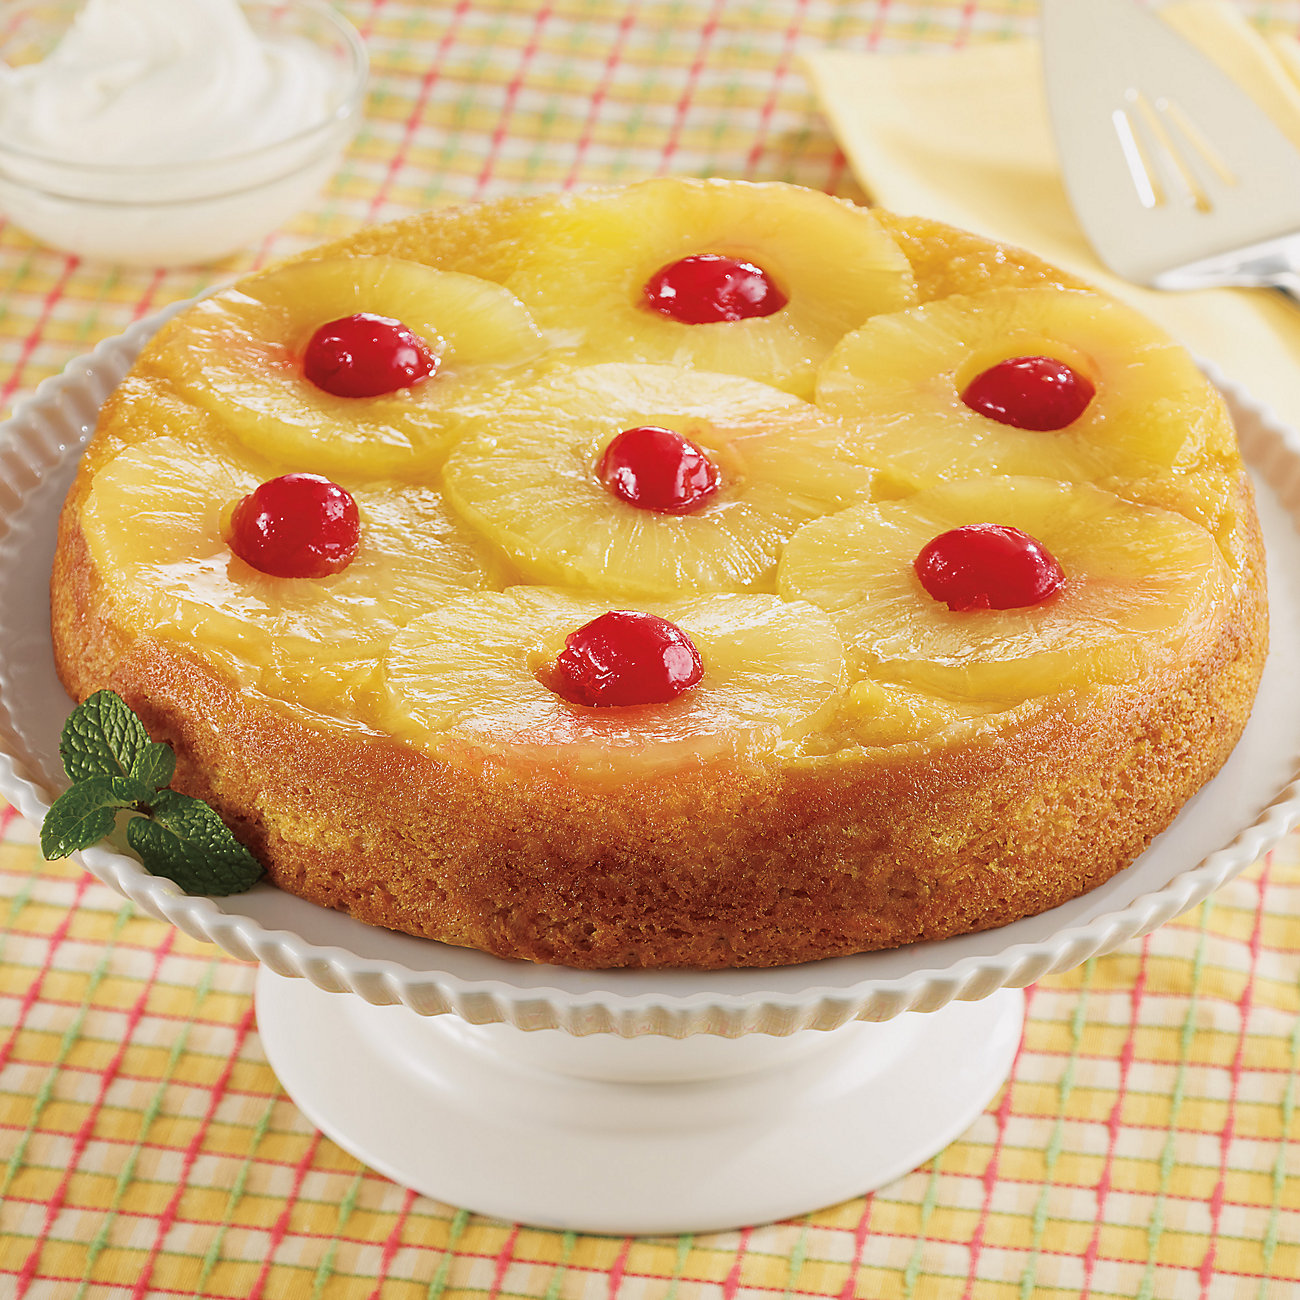 https://images.heb.com/is/image/HEBGrocery/Large/double-pineapple-upside-down-cake-recipe-1.jpg